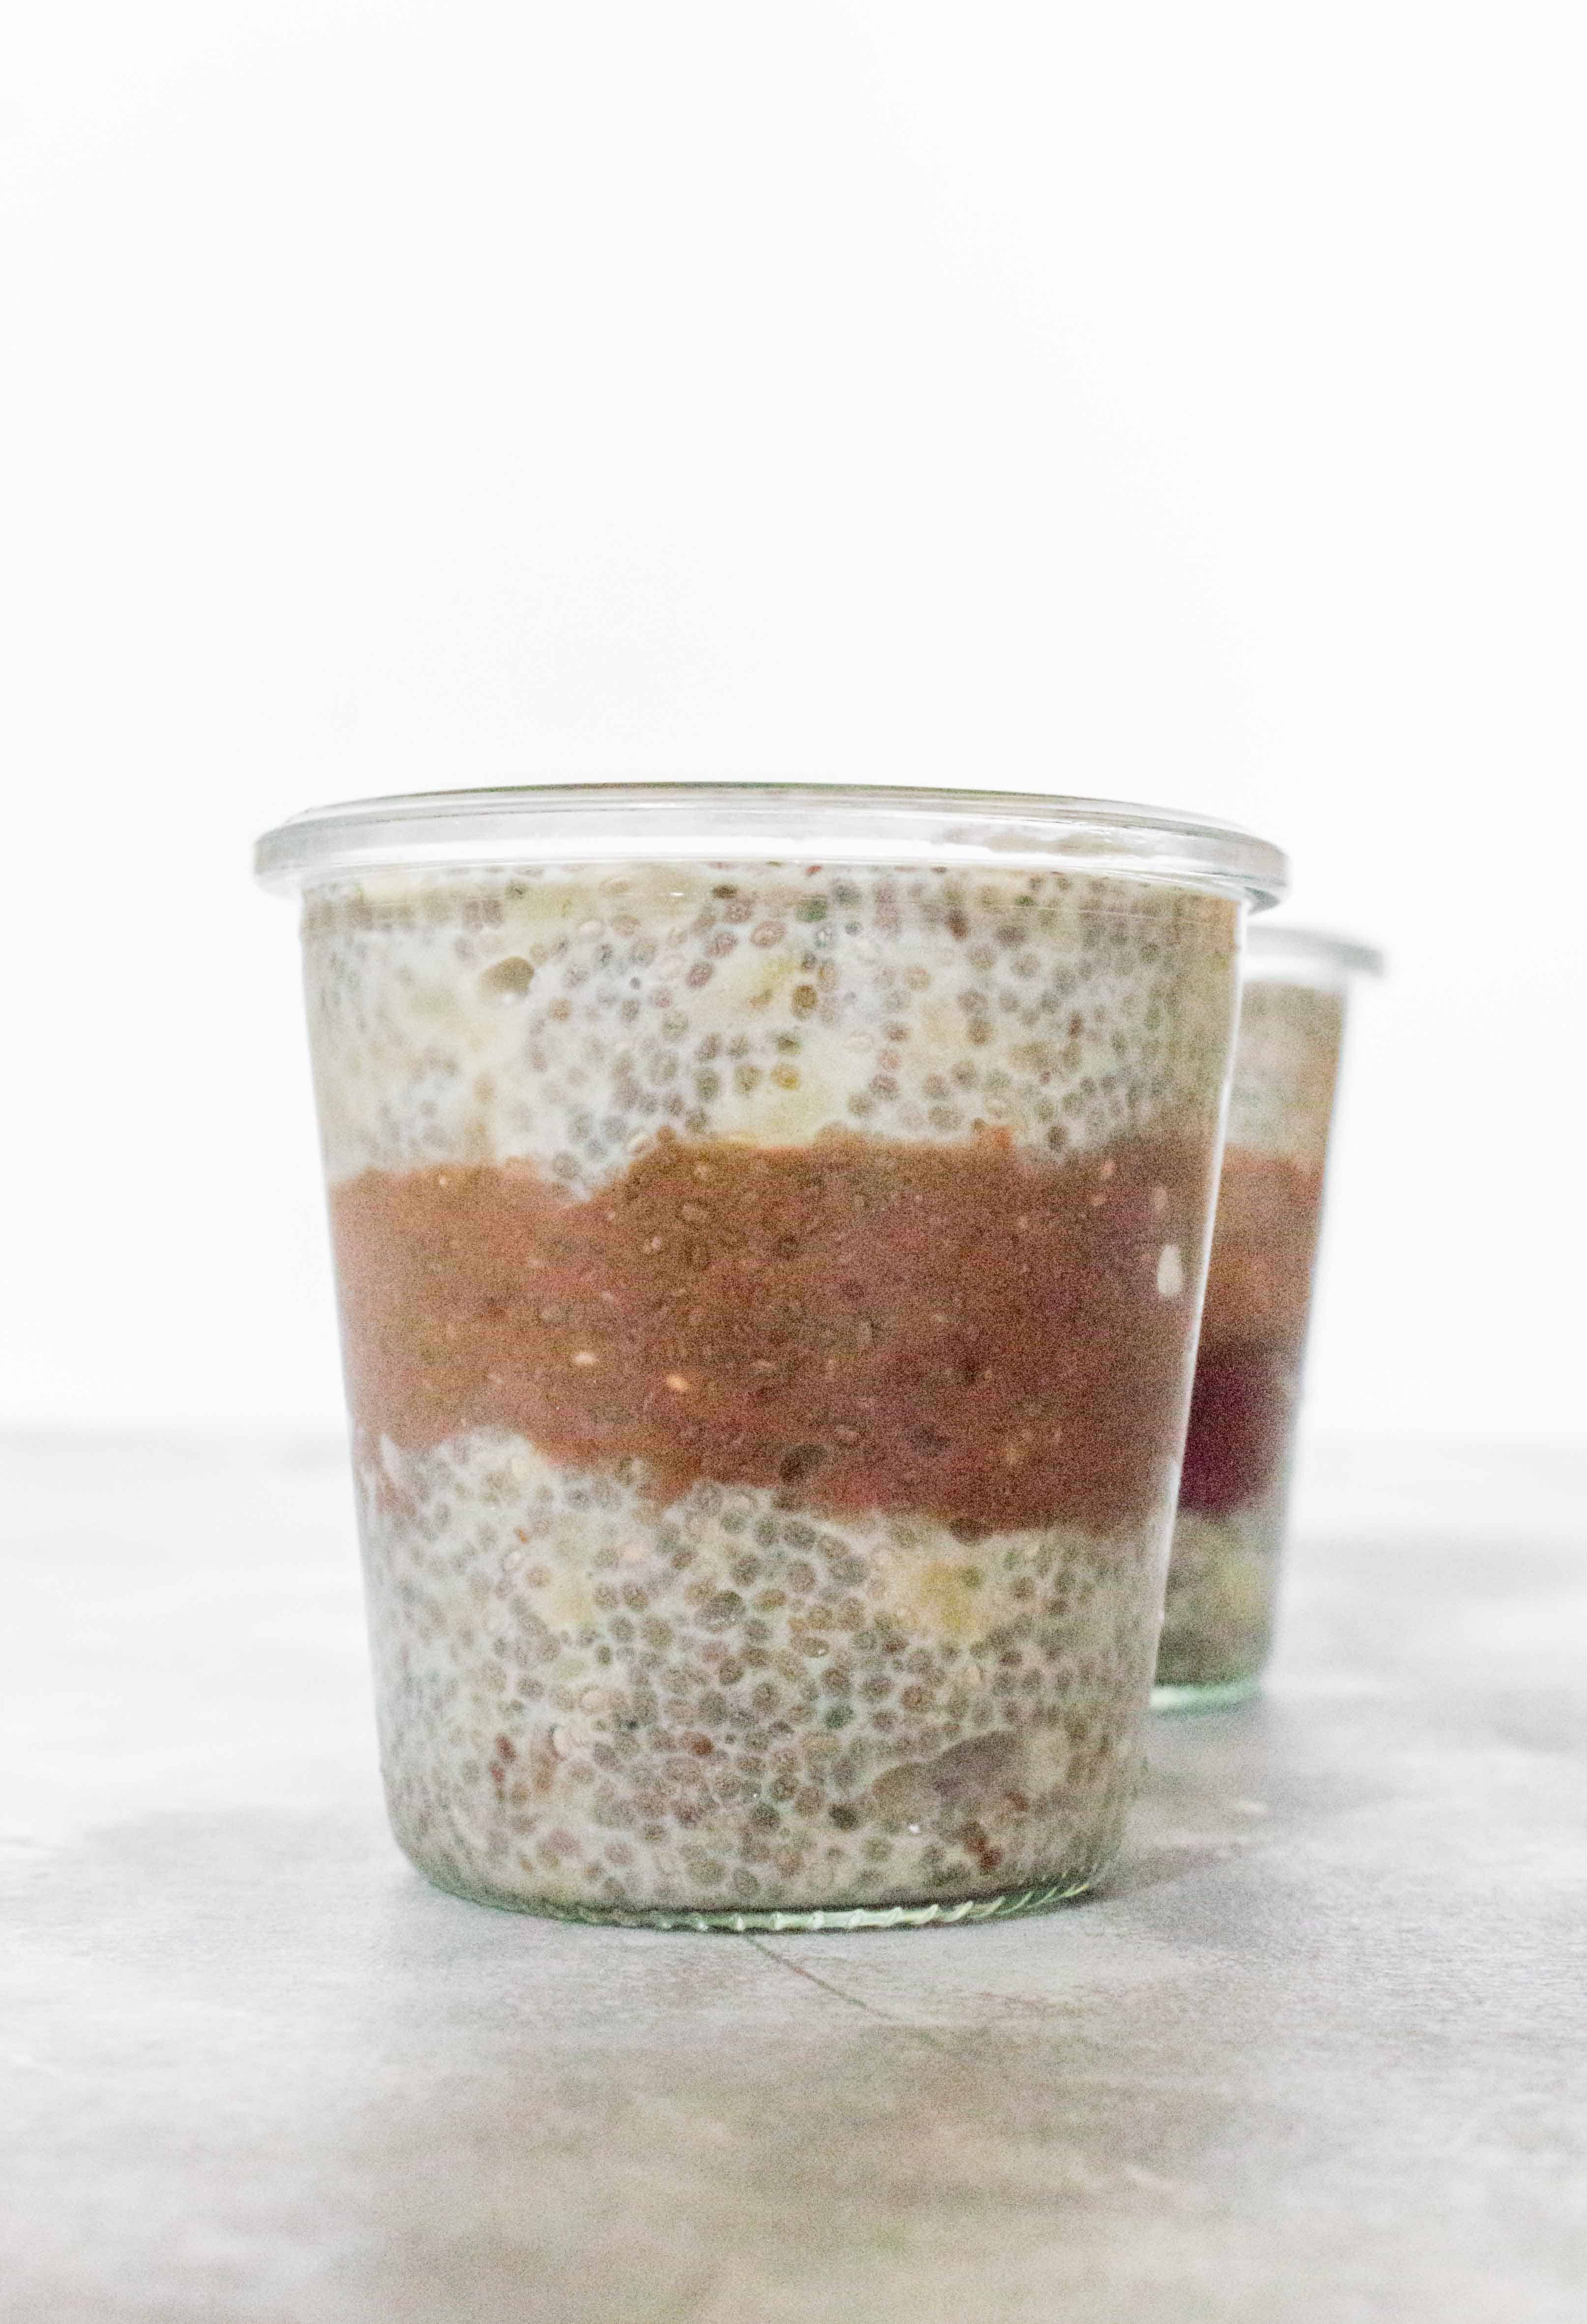 You are going to want jar after jar of this delicious but healthy Chocolate Banana Chia Pudding after your first bite!Â 